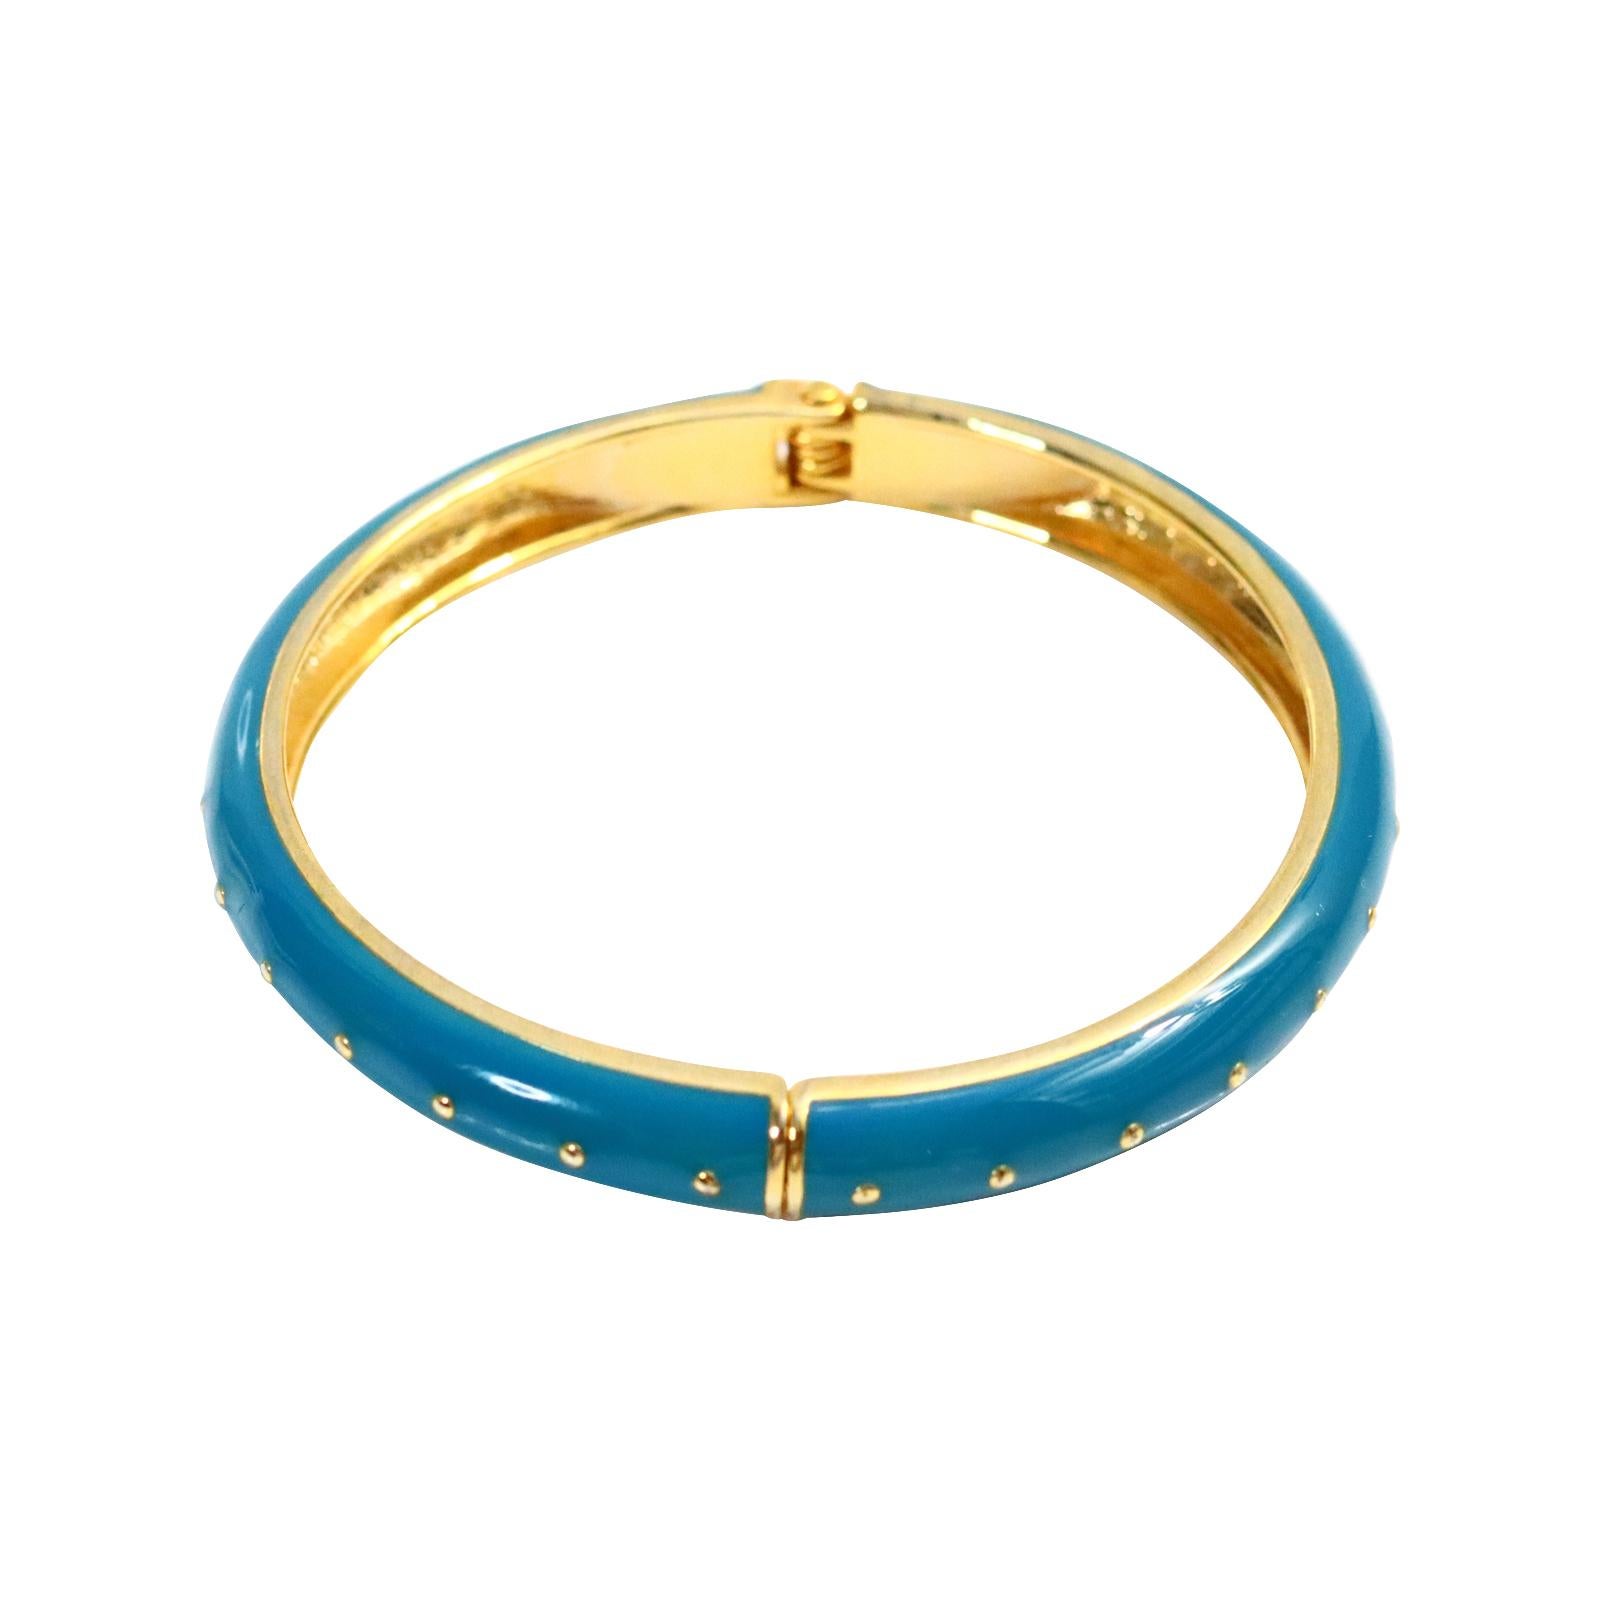 Vintage Turquoise Enamel and Gold Clamper Set of 3 Bracelets Circa 1990s.  To be worn as one, tow or three. Worn with Gold Bracelets or even matched with the Double Leopard Enamel Bracelet that I have listed would look great. These will always make